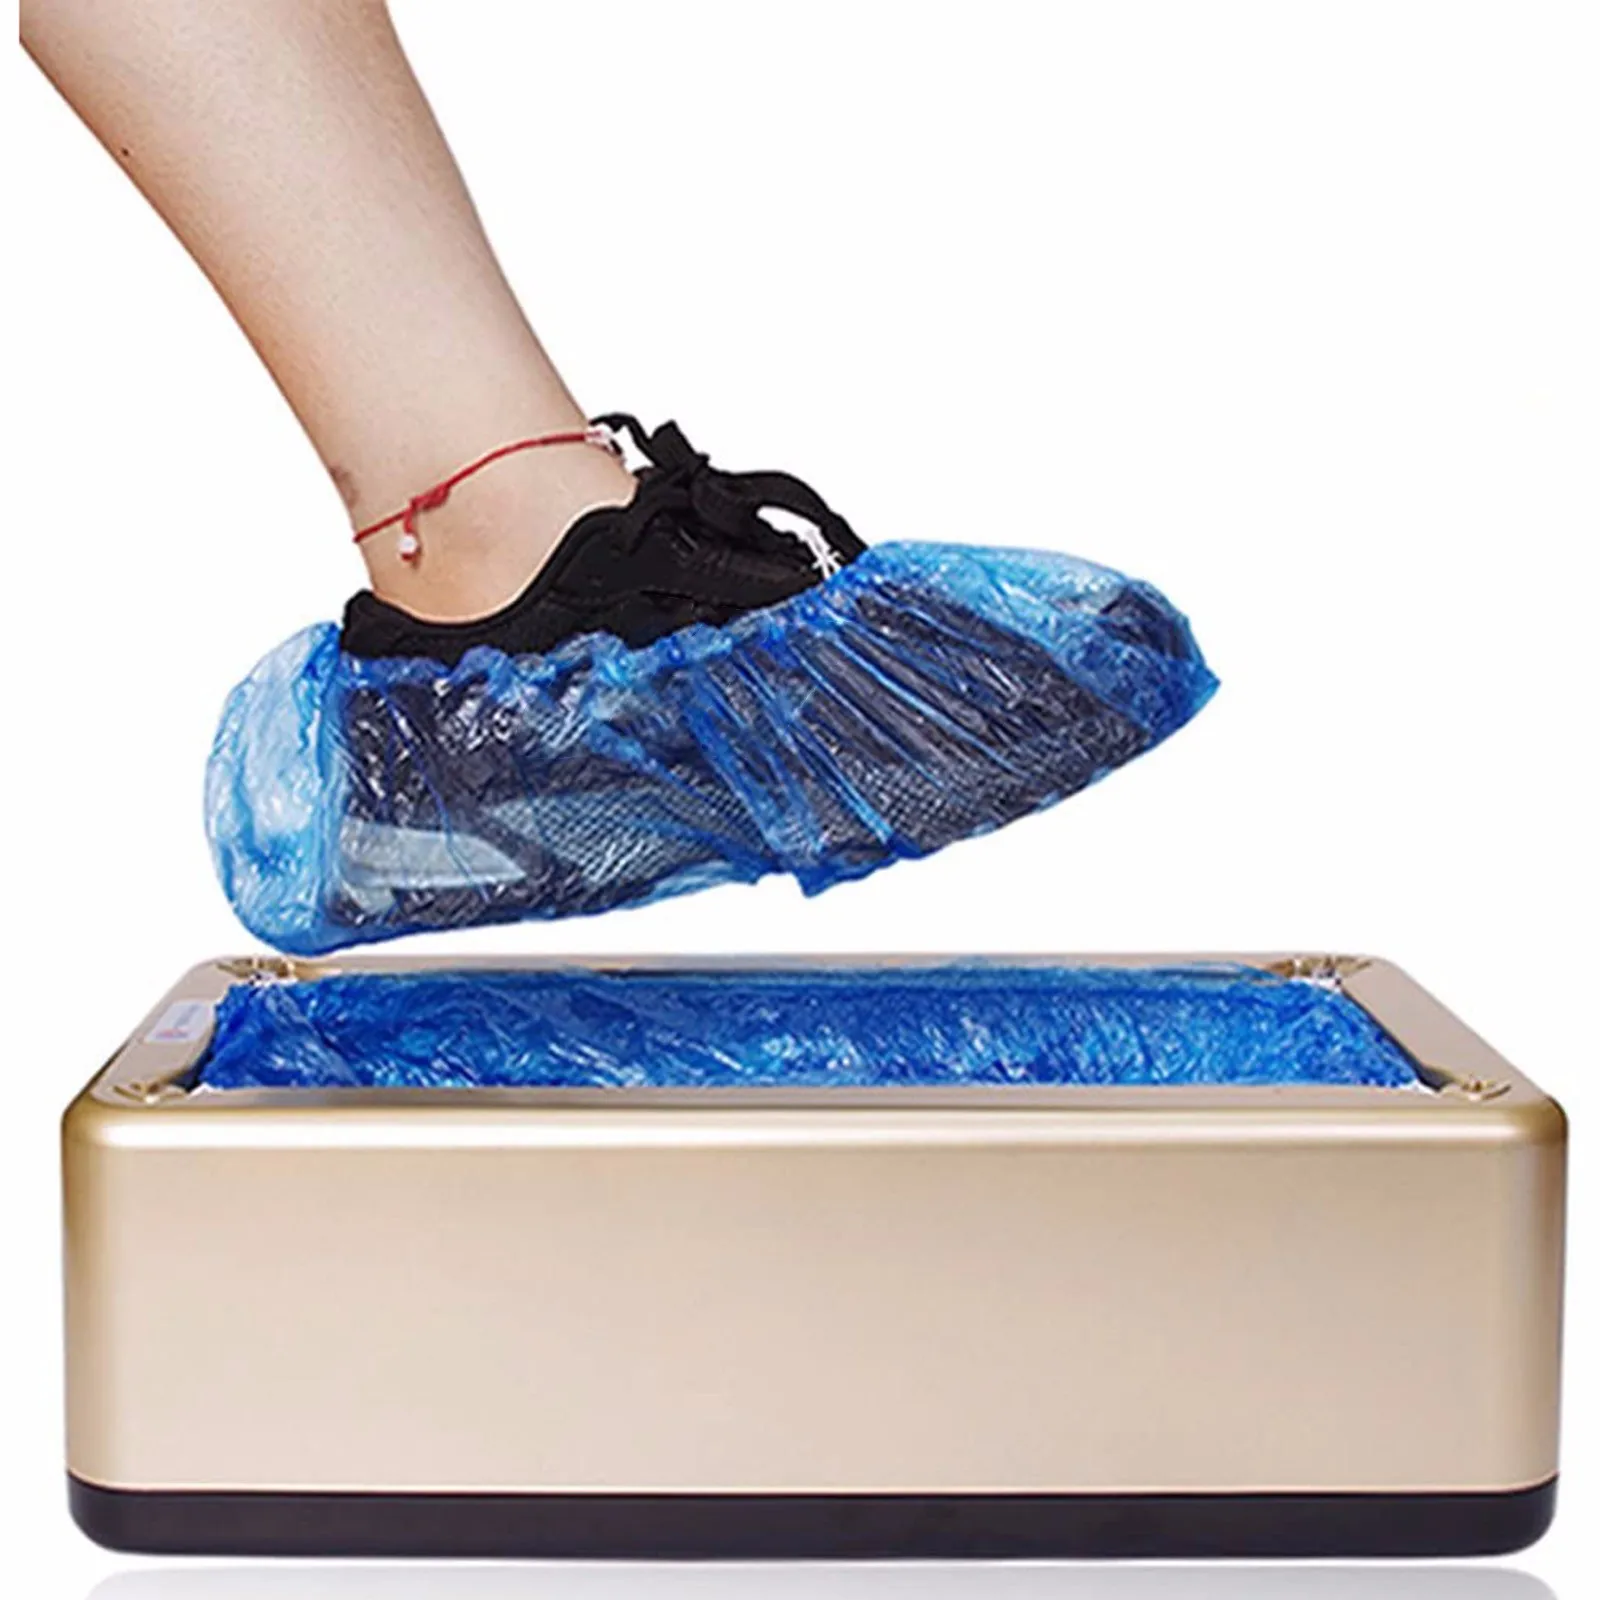 Home Automatic Shoe Cover Dispenser Machine Overshoe Disposable Carpet Cleaning 